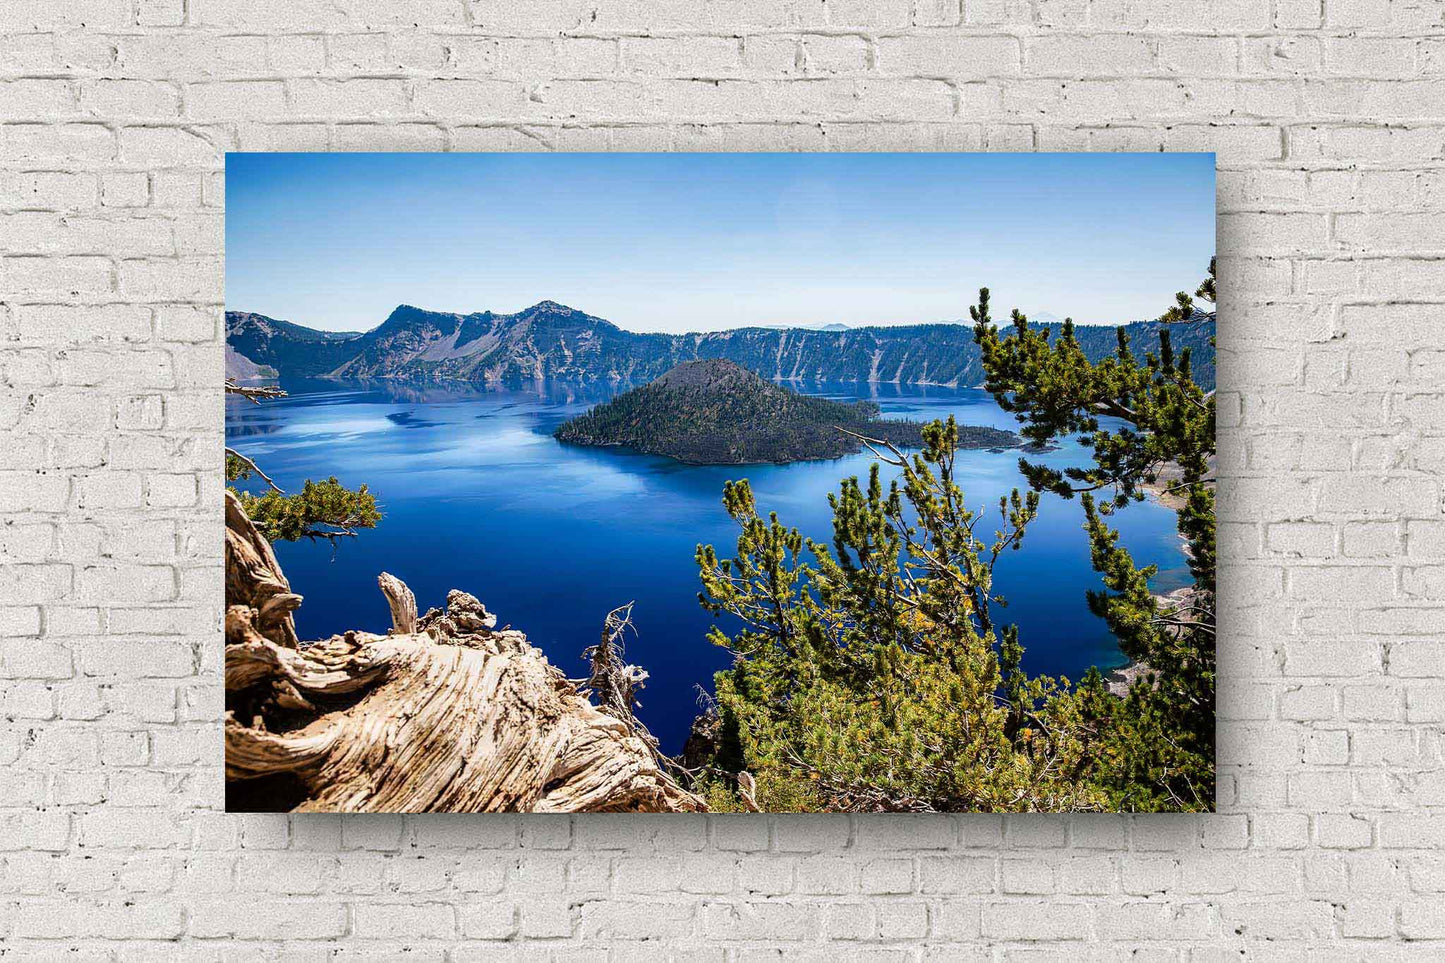 Pacific Northwest Pacific Northwest aluminum metal print of Crater Lake and Wizard Island on a summer day in Oregon by Sean Ramsey of Southern Plains Photography.